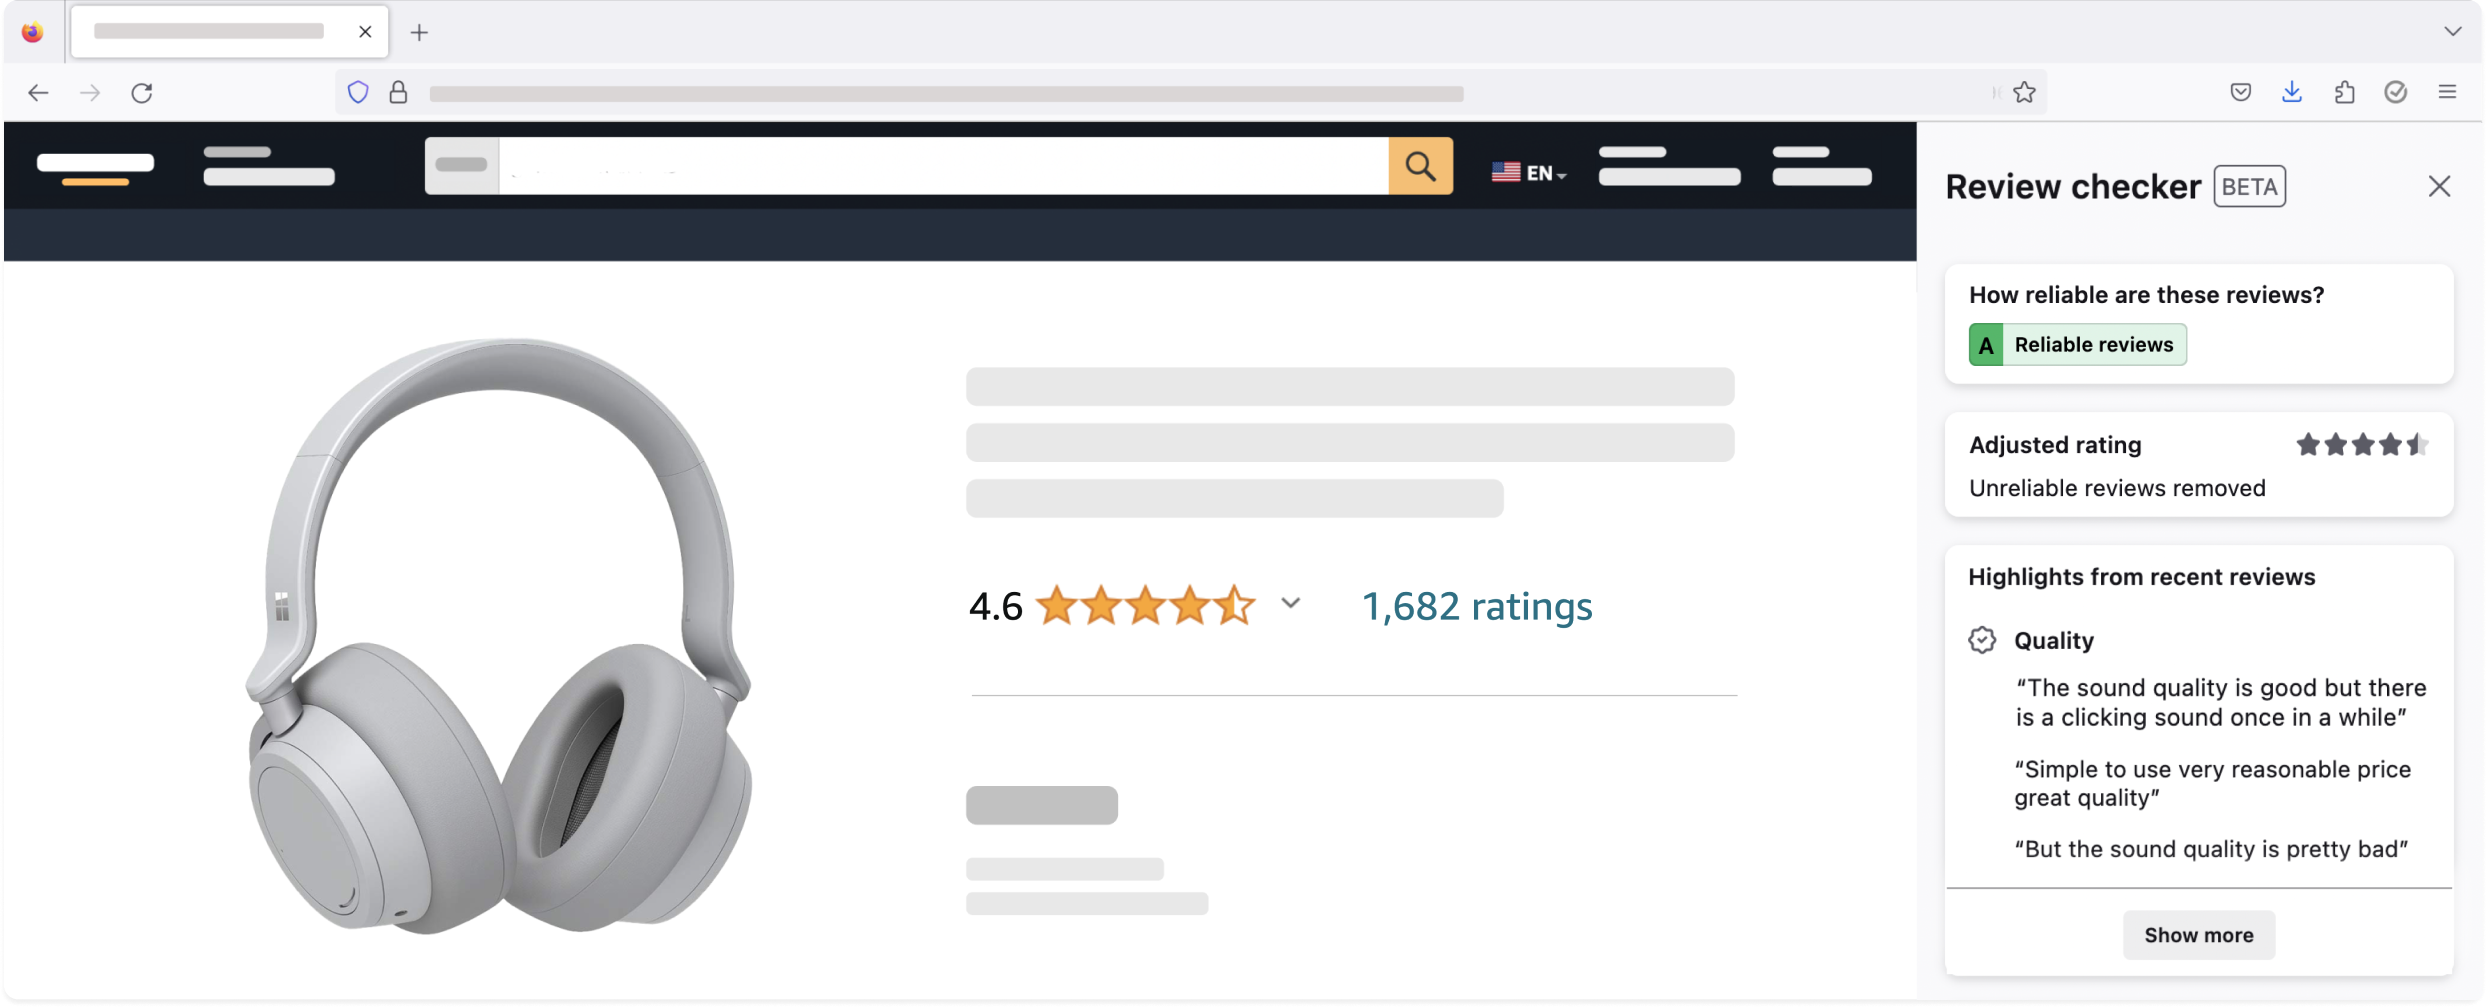 Earphones with 4.6 stars from 1,682 ratings got Adjusted Rating by Review Checker of 4.5 stars with Fakespot Review Grade of A (Reliable Reviews) as shown by the Review Checker Beta sidebar